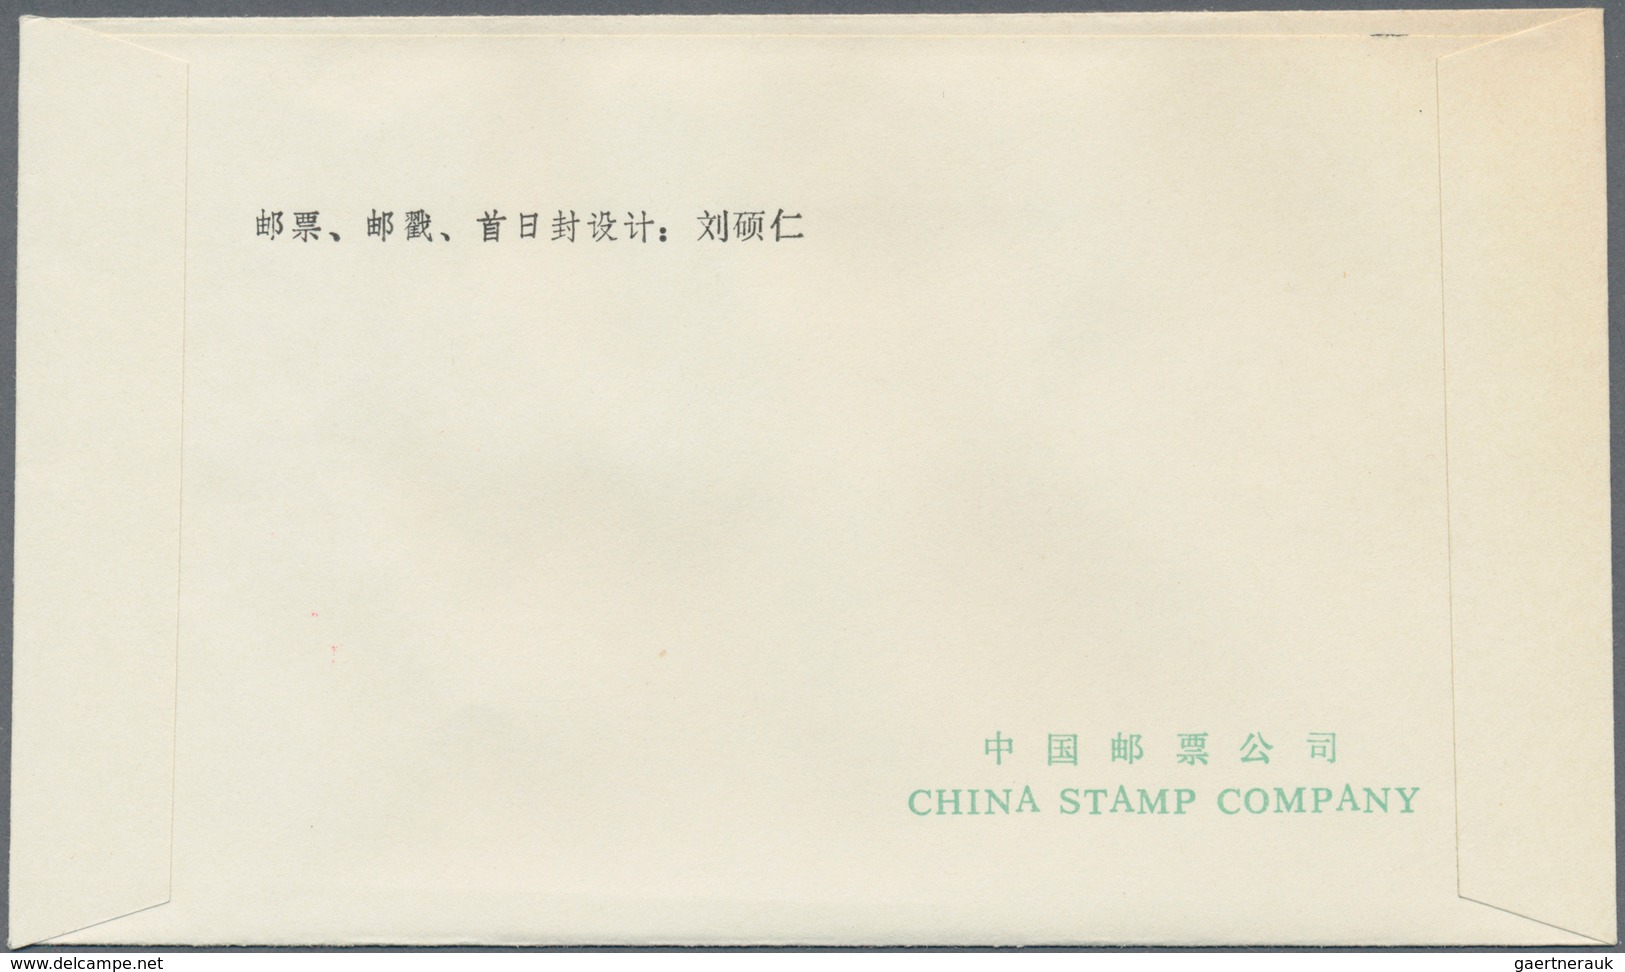 China - Volksrepublik: 1979/80, sets of FDCs, including T37, T43, T44, T45, T54, and T54M, all with